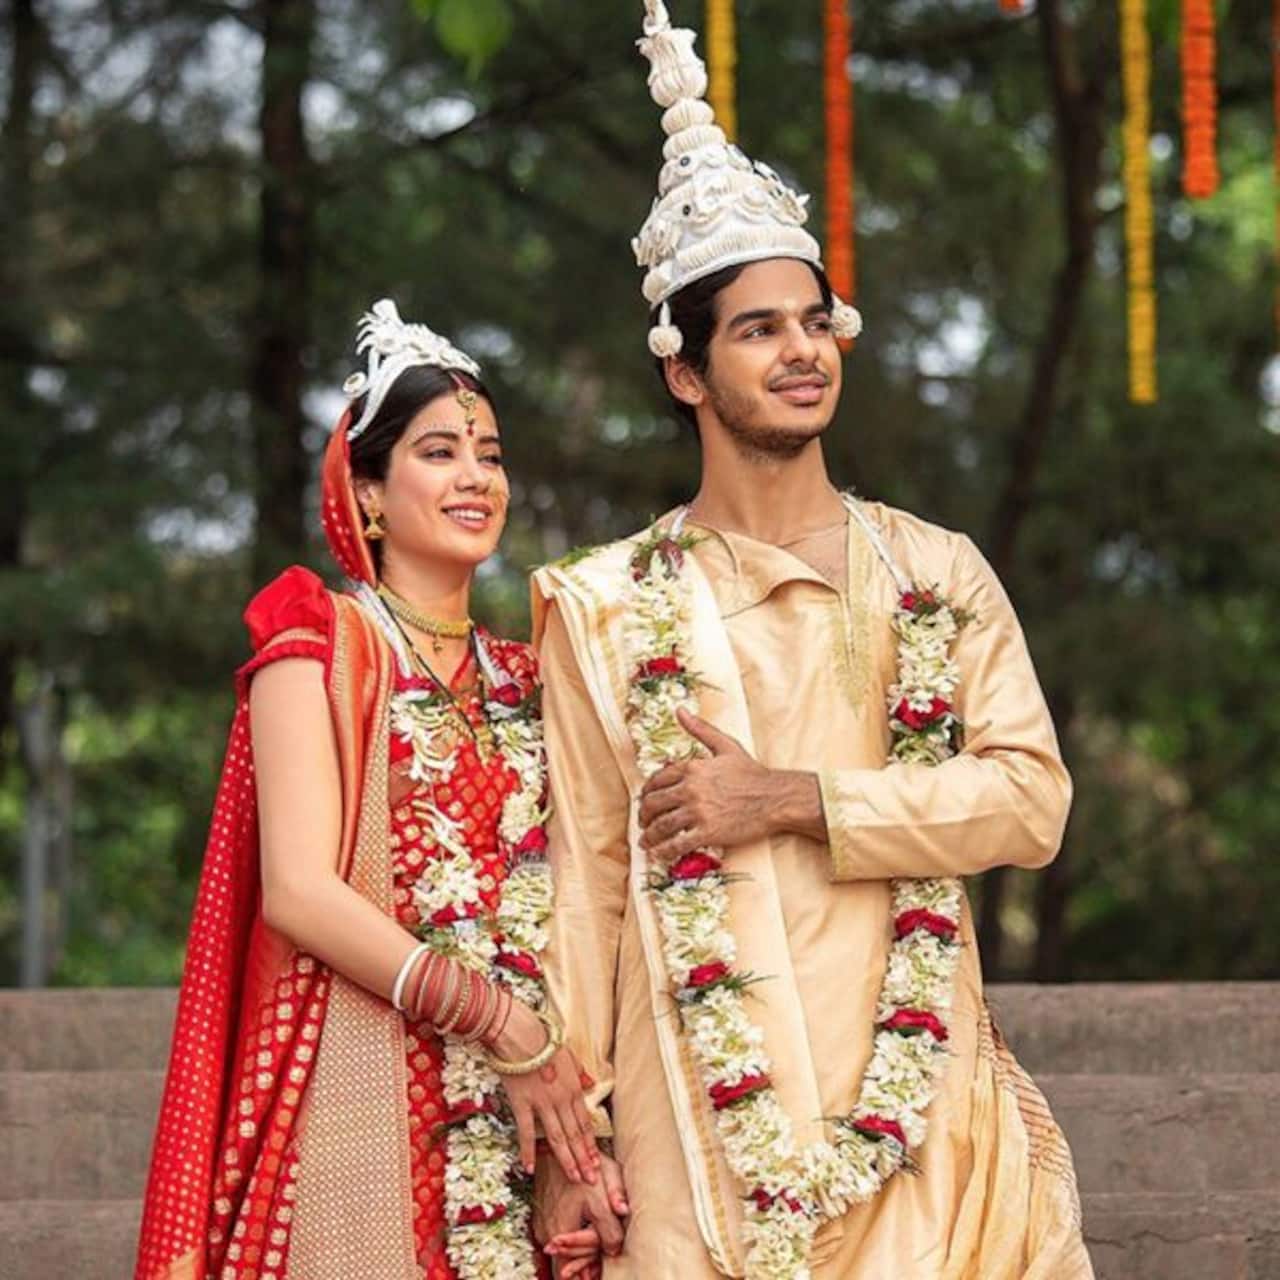 Janhvi and Ishaan's Dhadak is all set to beat the lifetime business of Student of the Year